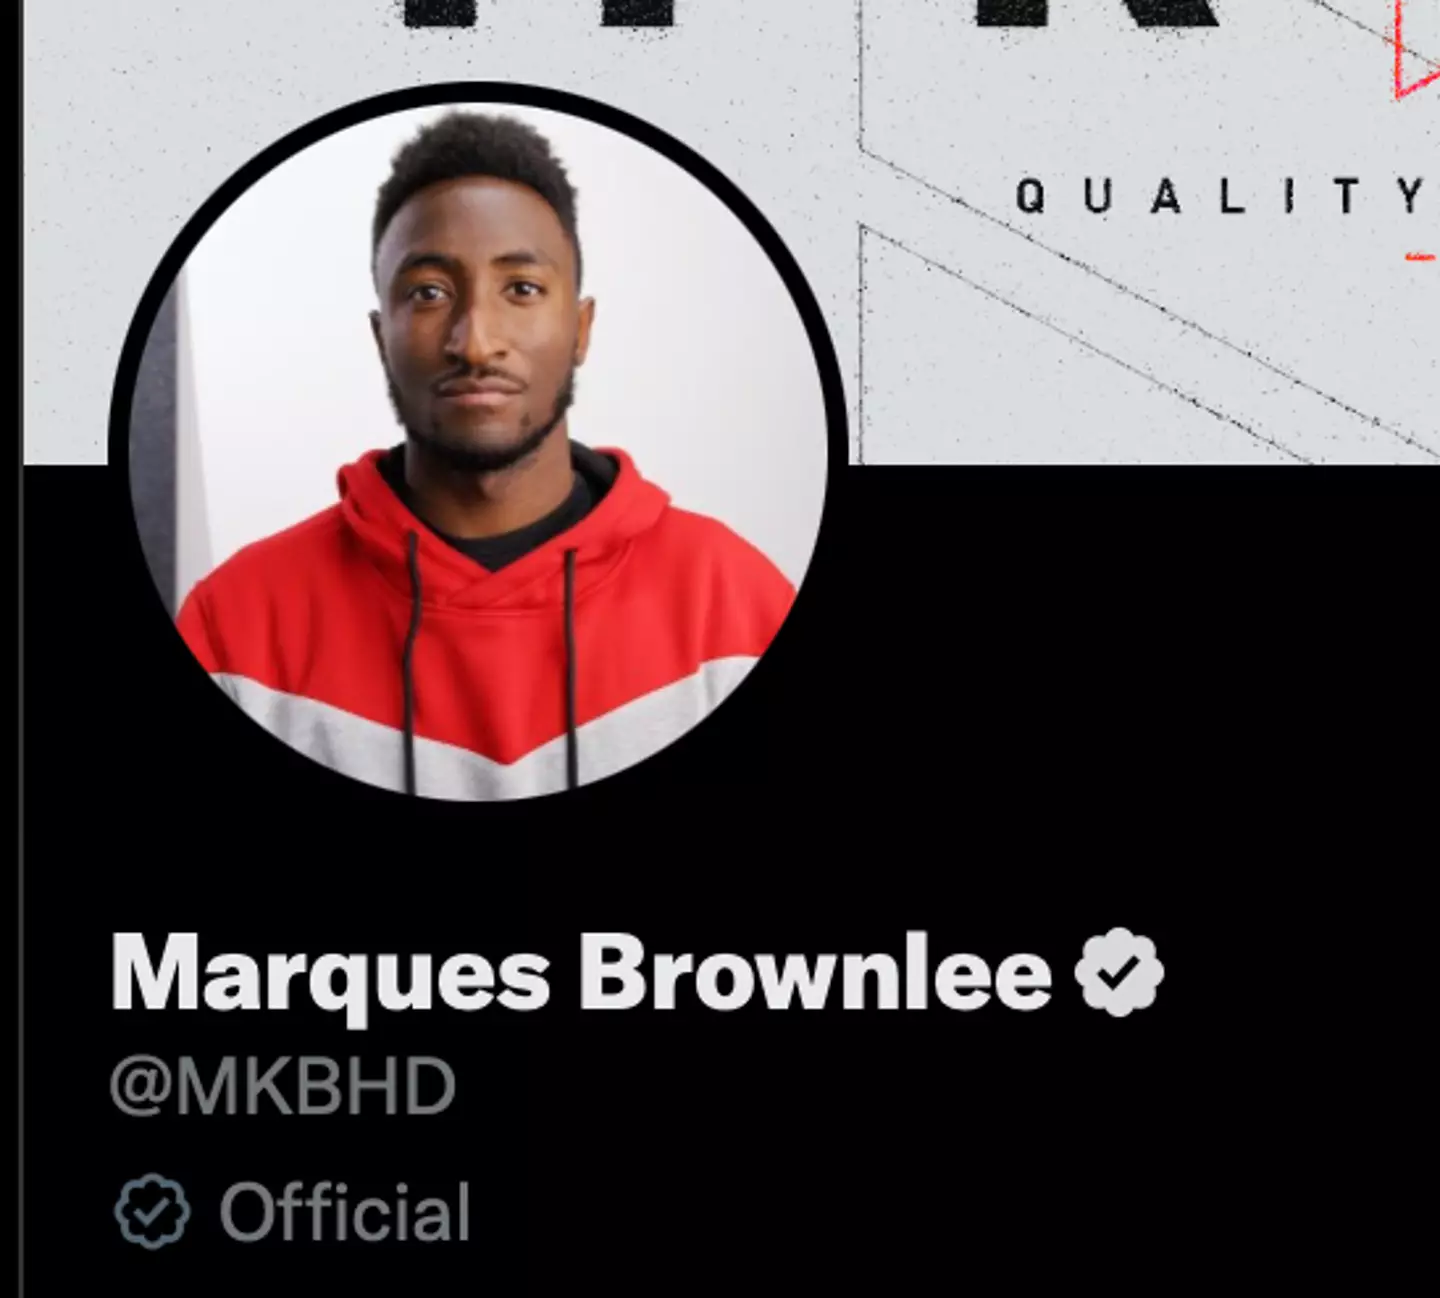 YouTuber Marques Brownlee noticed the change.